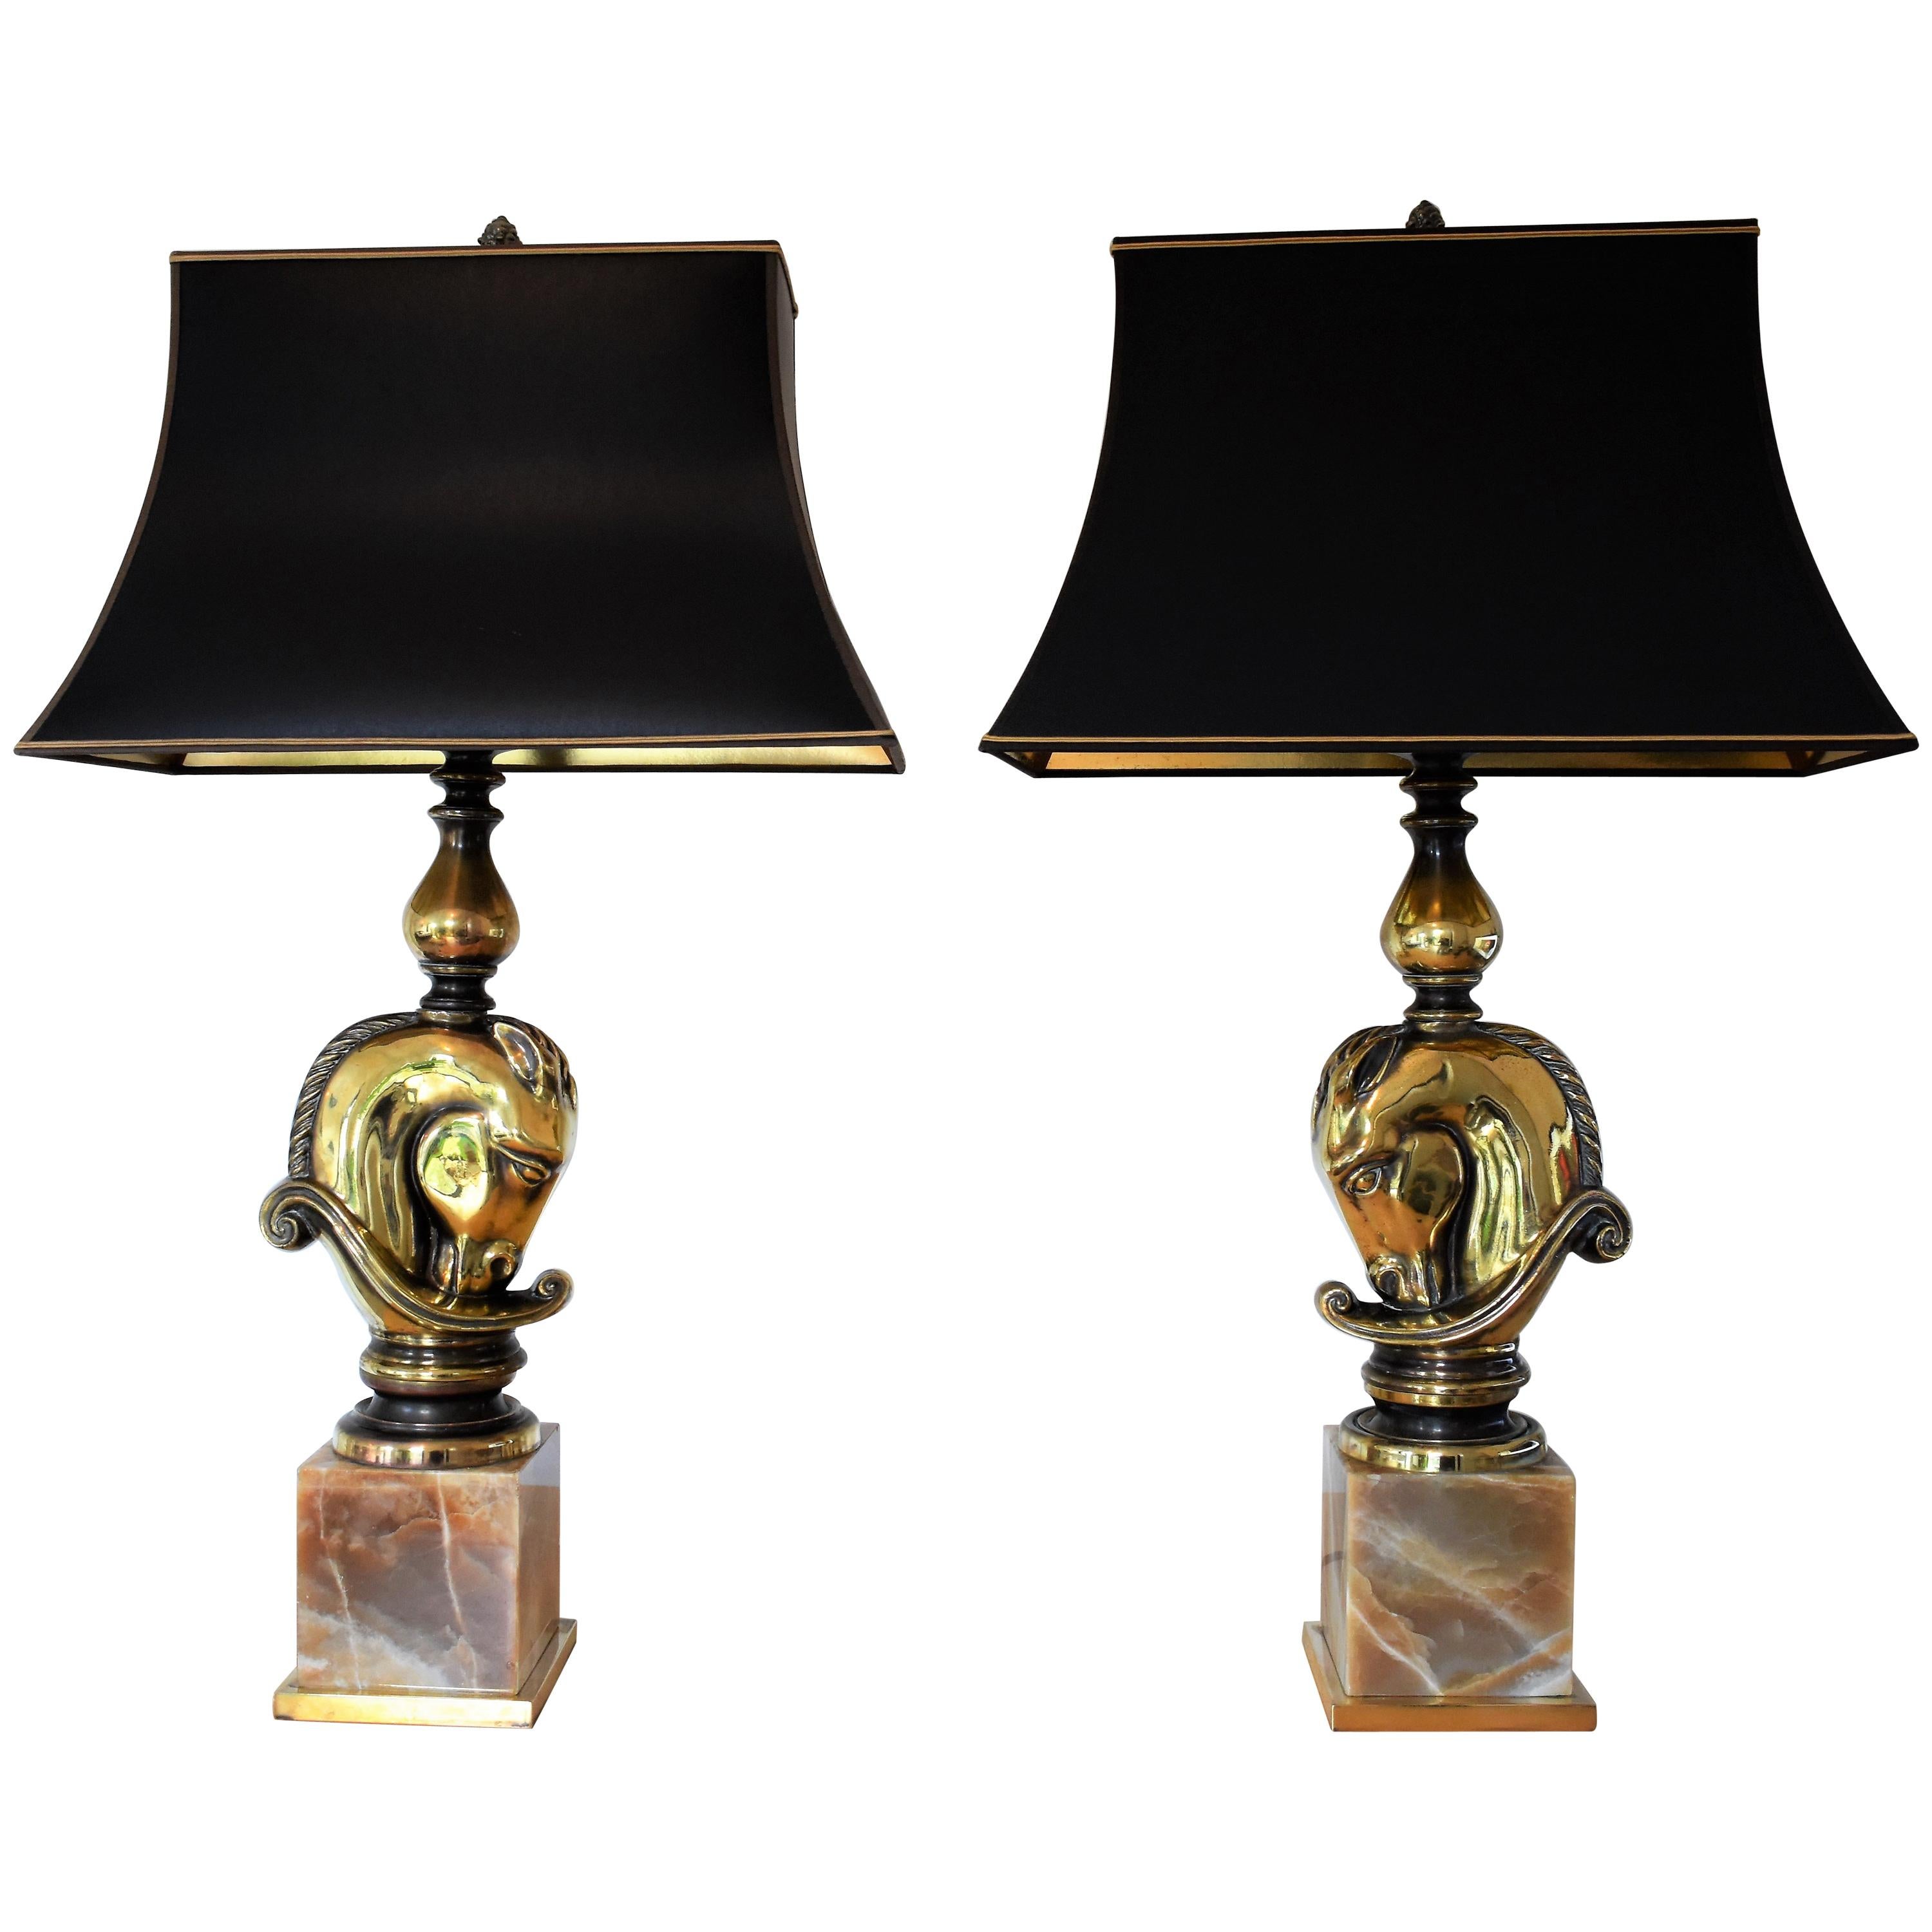 FINAL SALE Vintage Chess Piece Horsehead Table Lamps, Maison Charles 1970 For Sale